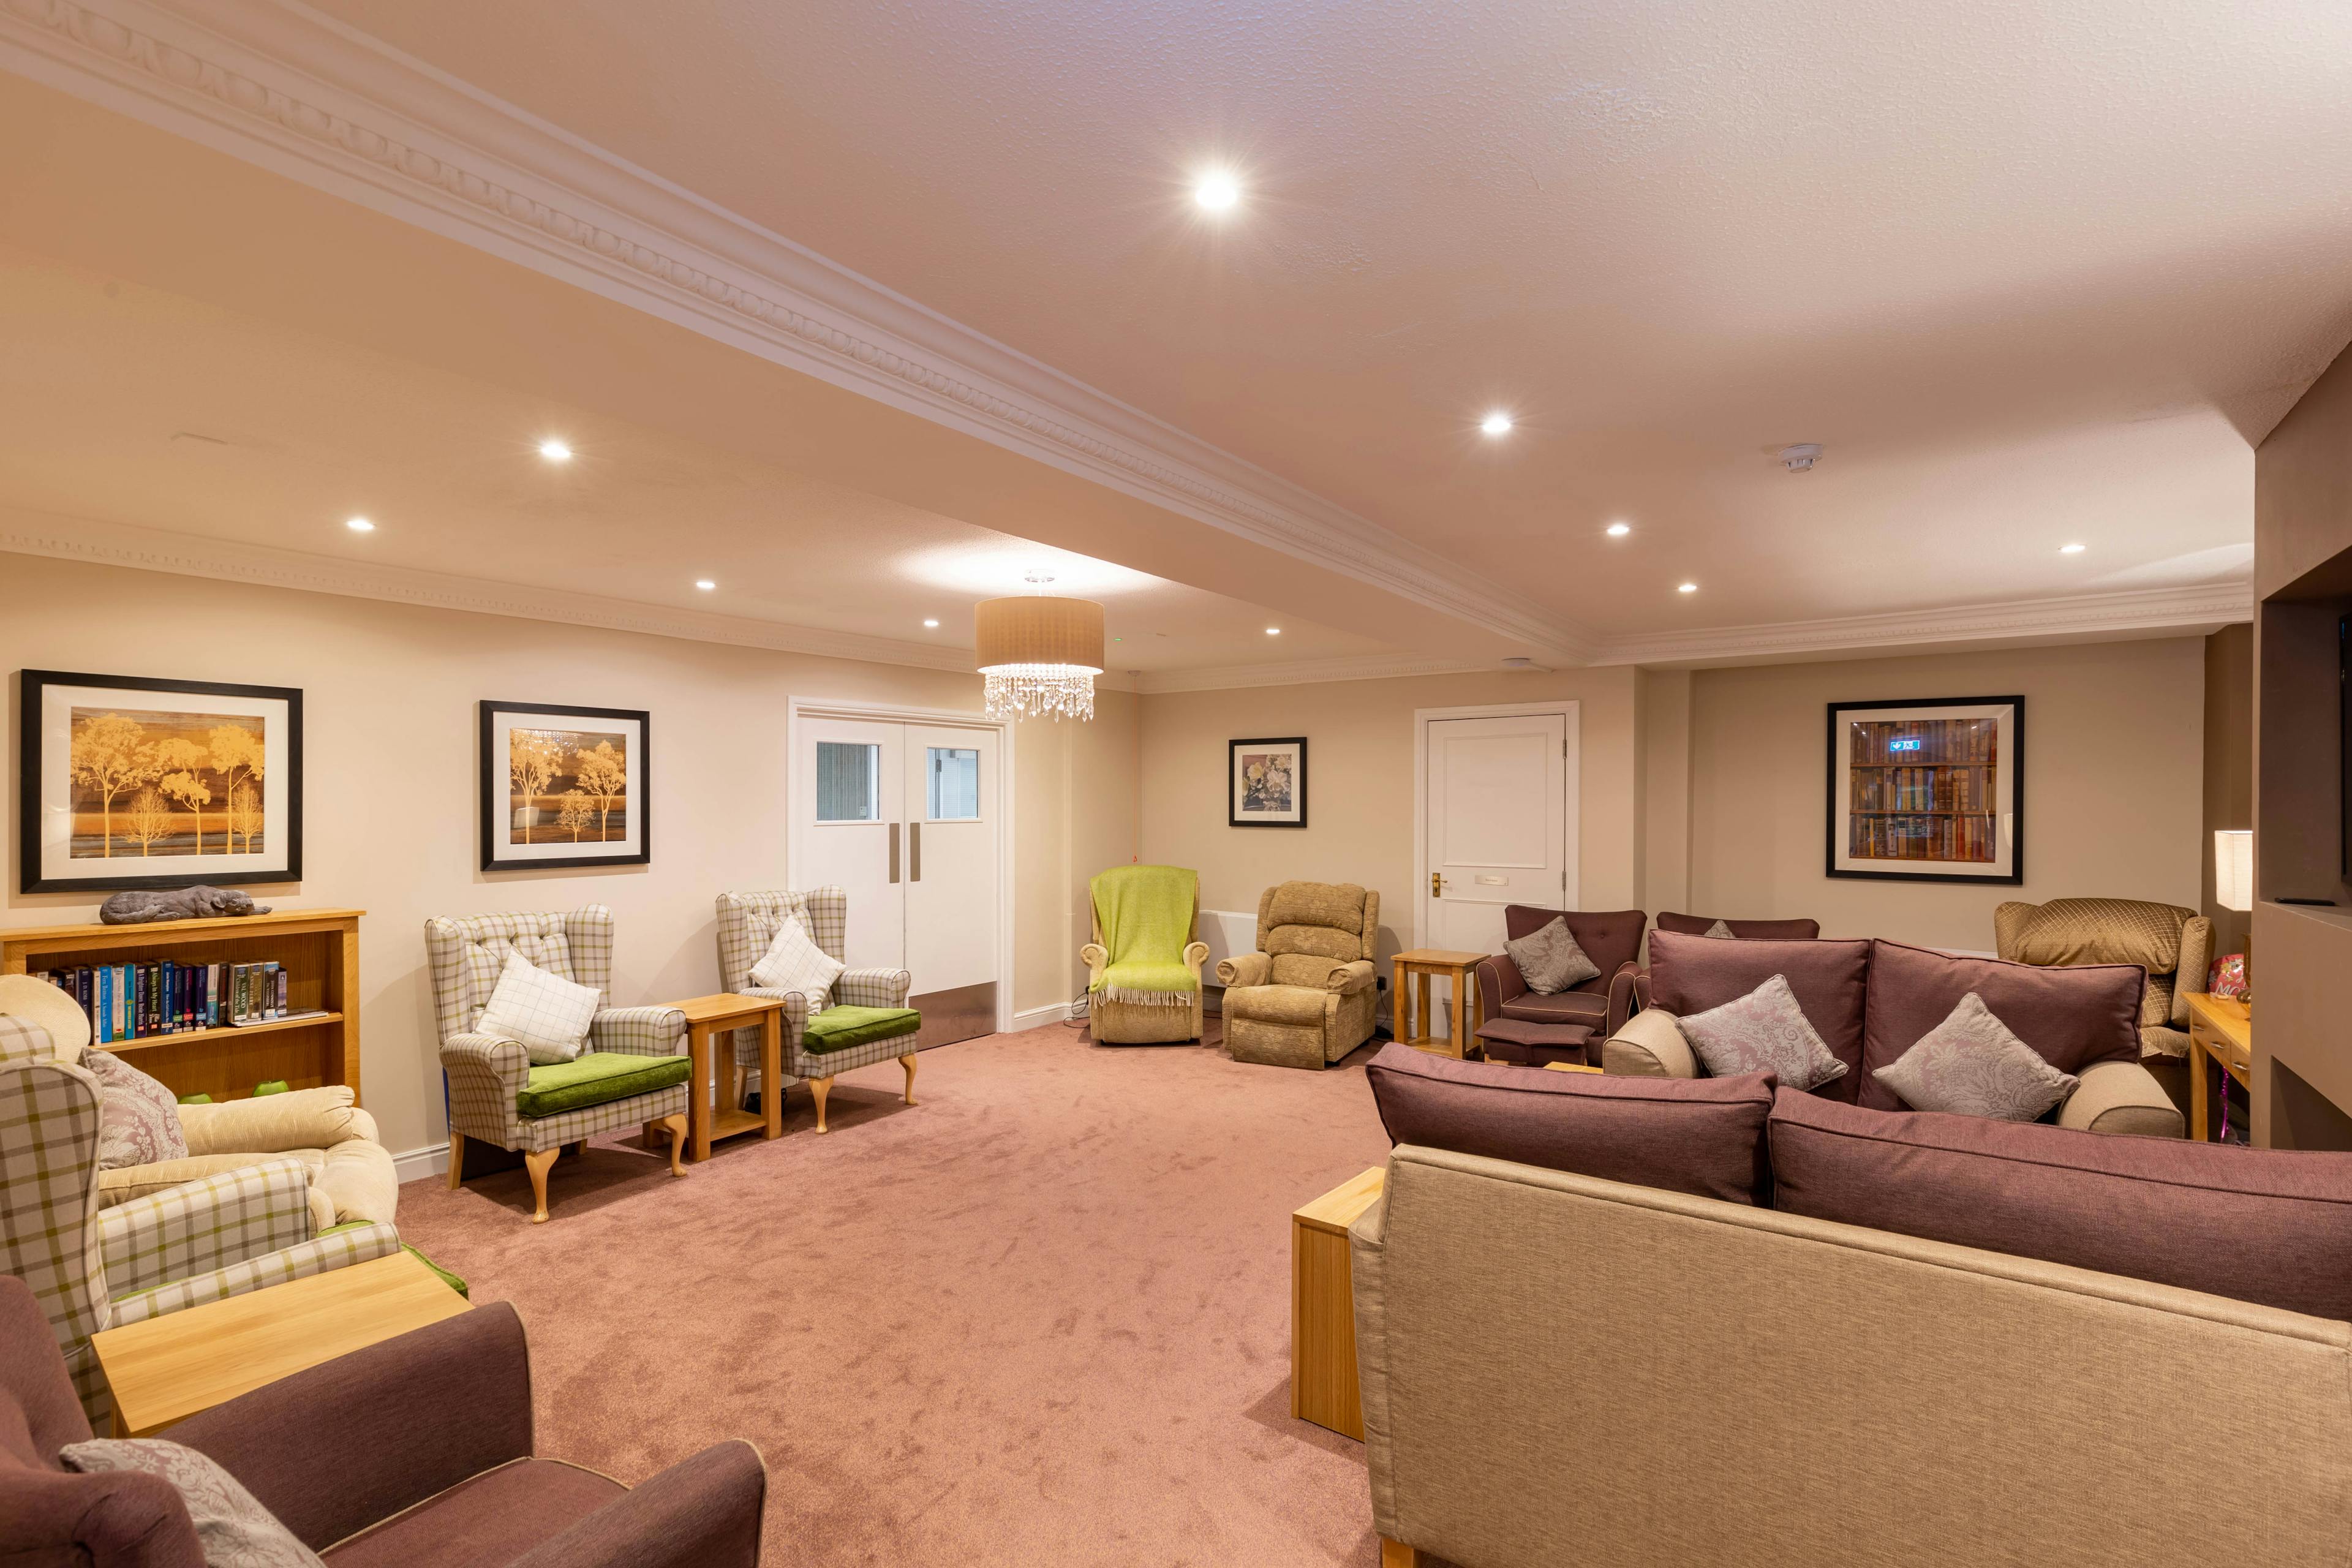 Communal Lounge at South Chowdene Care Home in Gateshead, Tyne and Wear